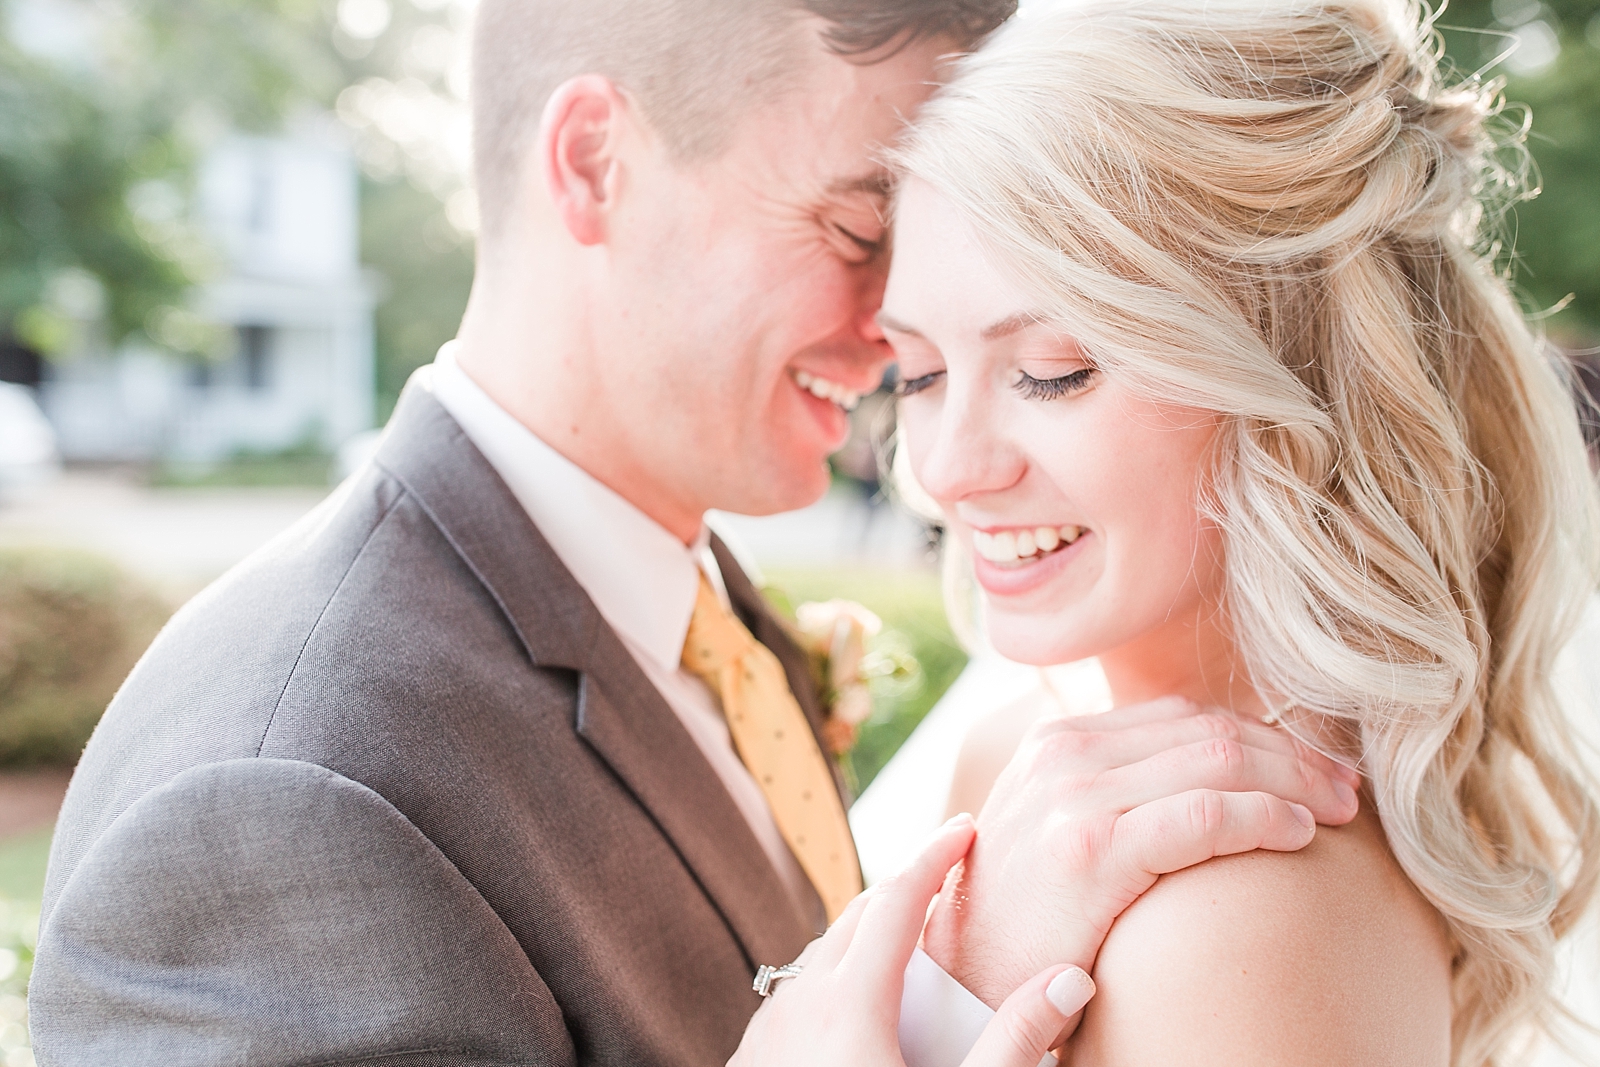 Columbia SC wedding venue bride and groom laughing together photo